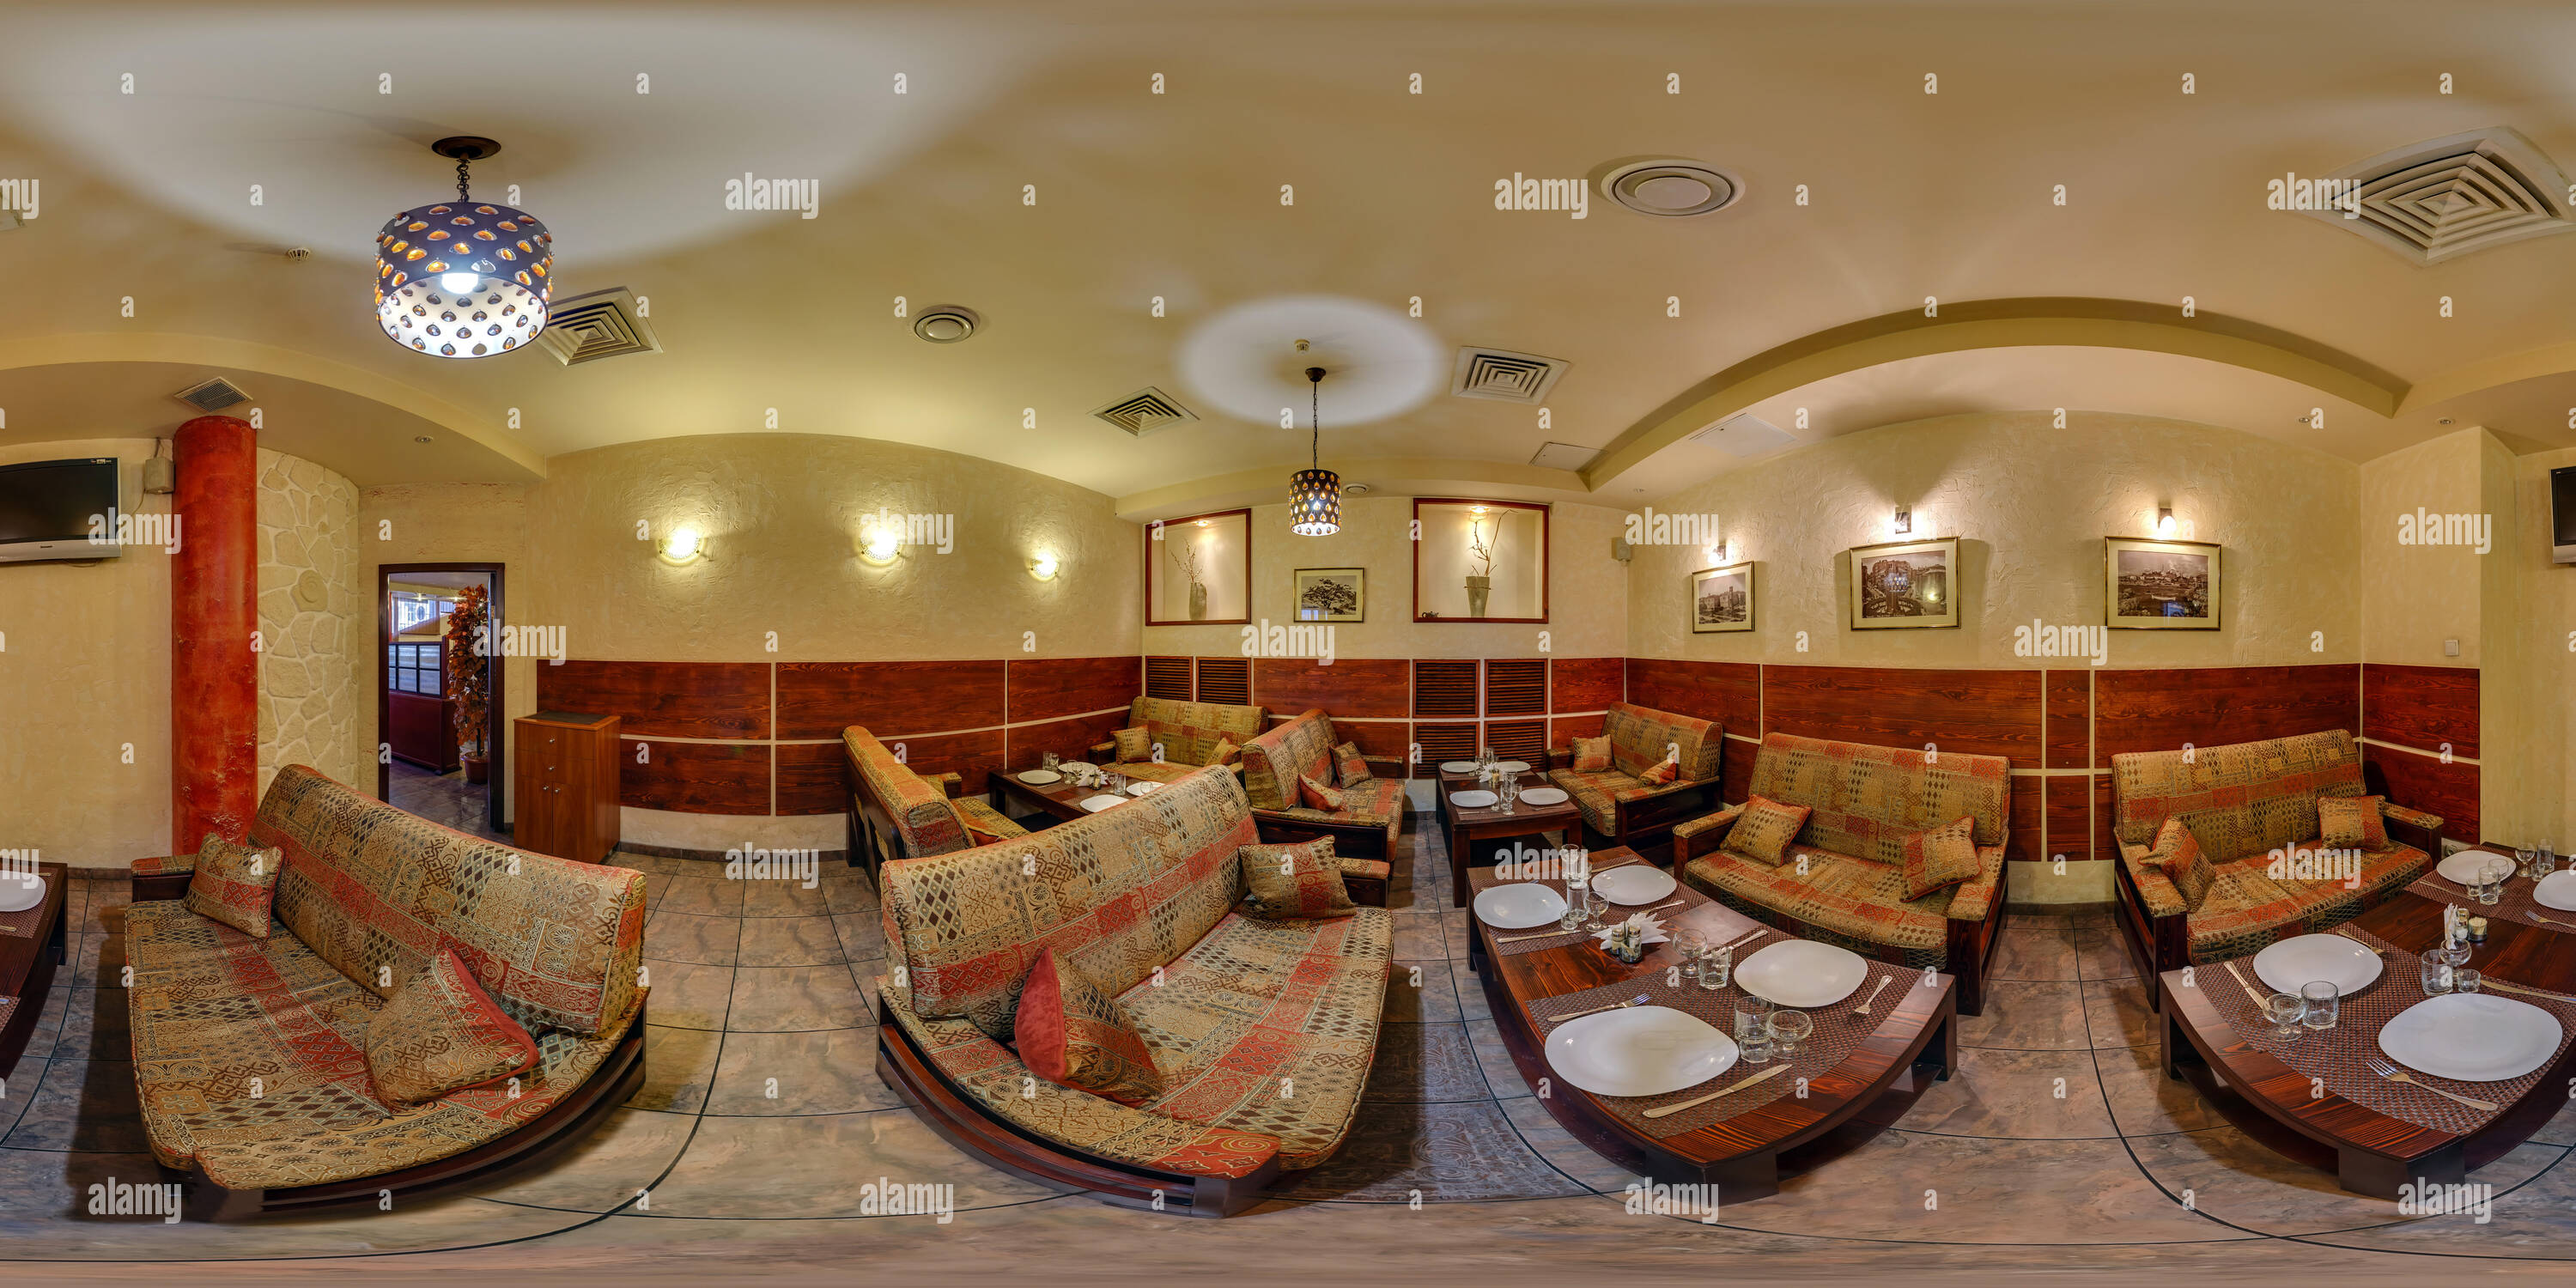 360 degree panoramic view of GOMEL, BELARUS - MARCH 26, 2012: Full 360 by 180 degree seamless panorama  in equirectangular spherical projection in interior stylish modern arabic c